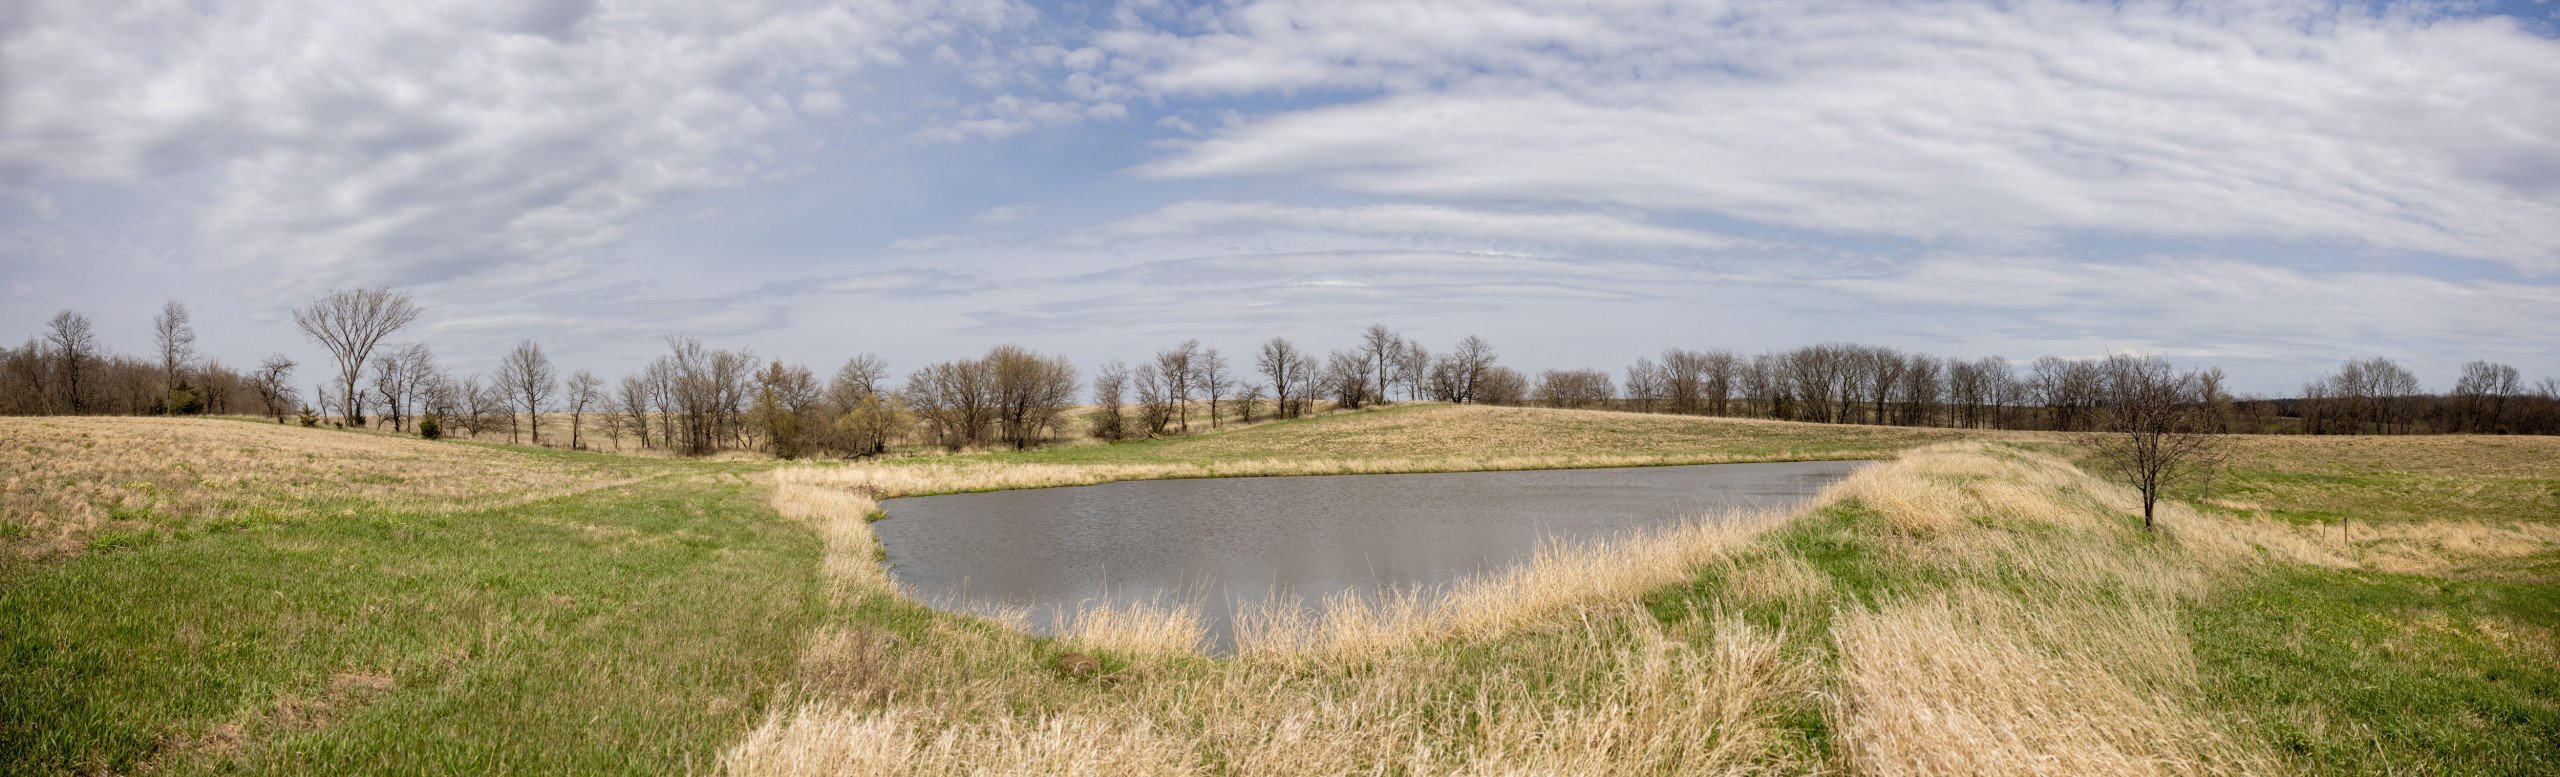 residential-land-clarke-county-iowa-40-acres-listing-number-16152-0M4A7226-Pano-0.jpg